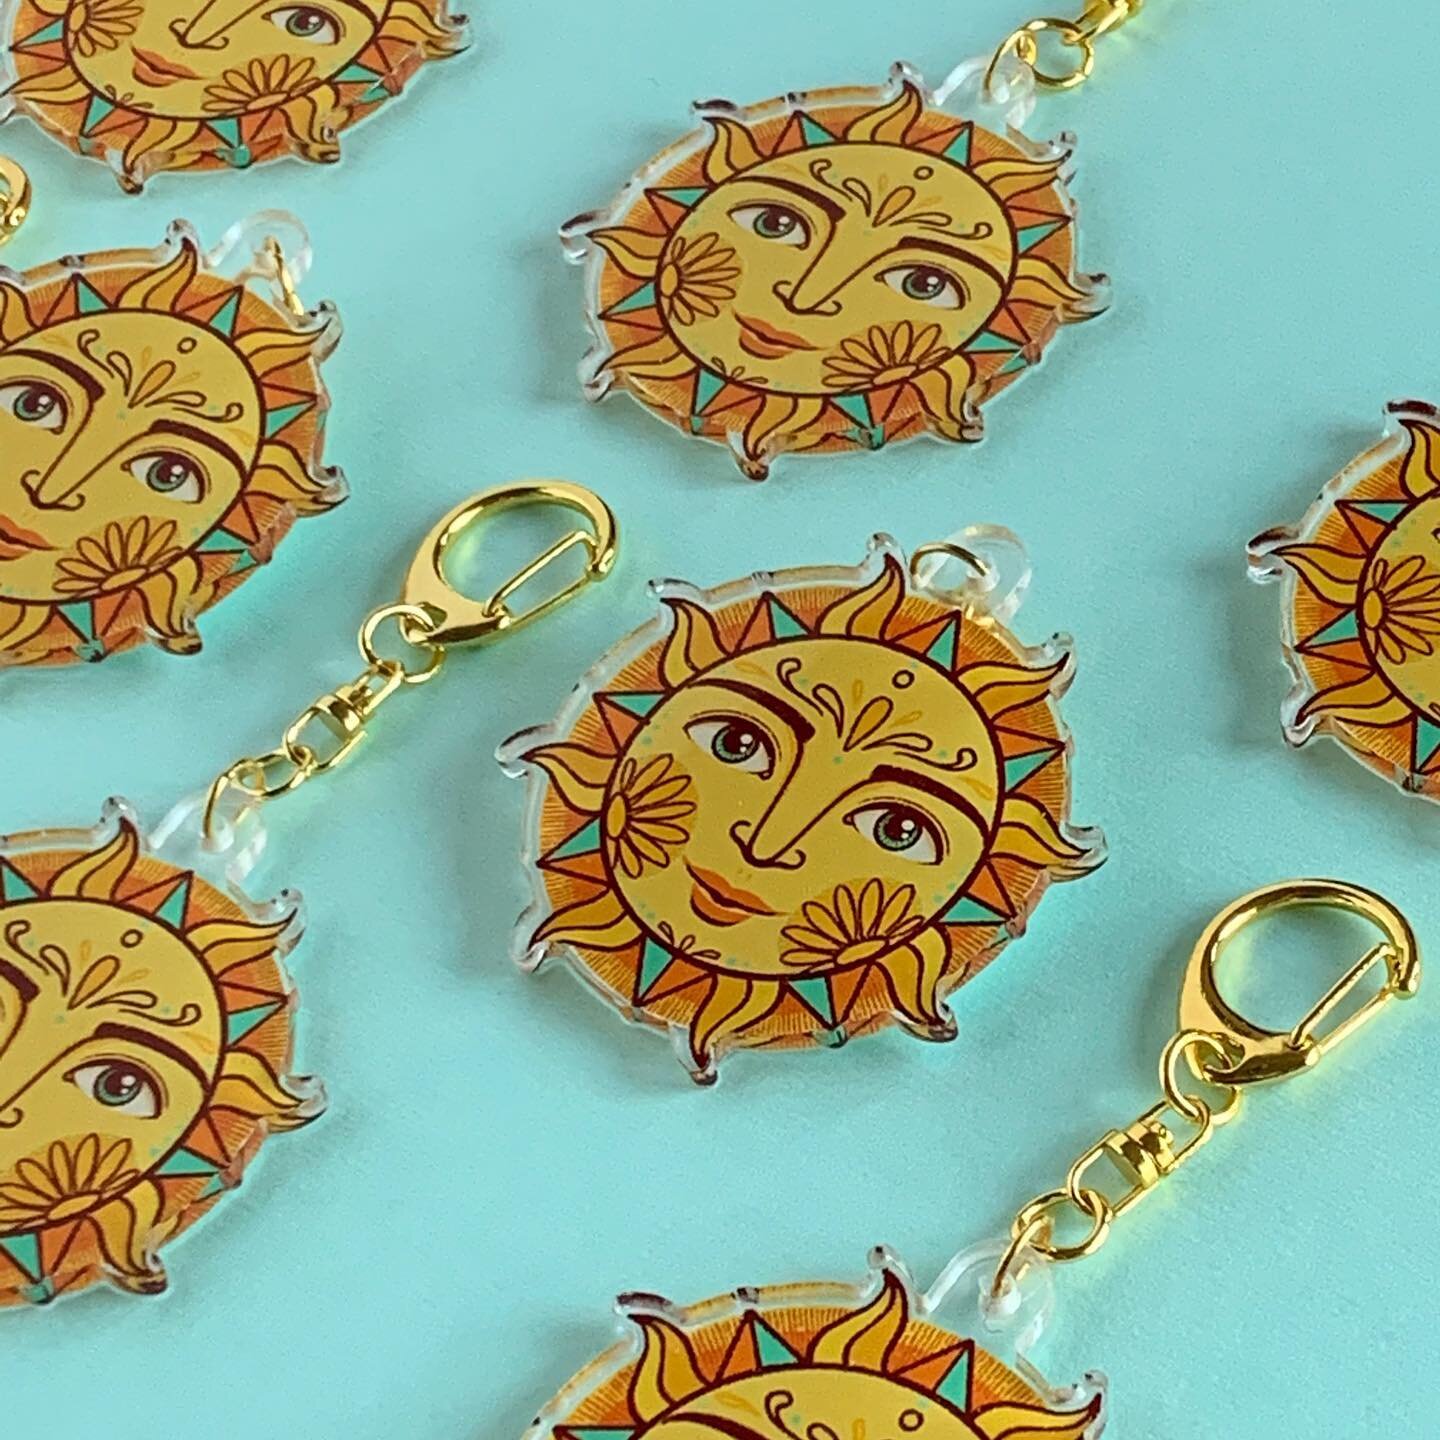 New sol keychains will be available in tomorrow&rsquo;s shop update.  11/5 at 1 pm PST.✨🌞✨ #thehappyskullstudio